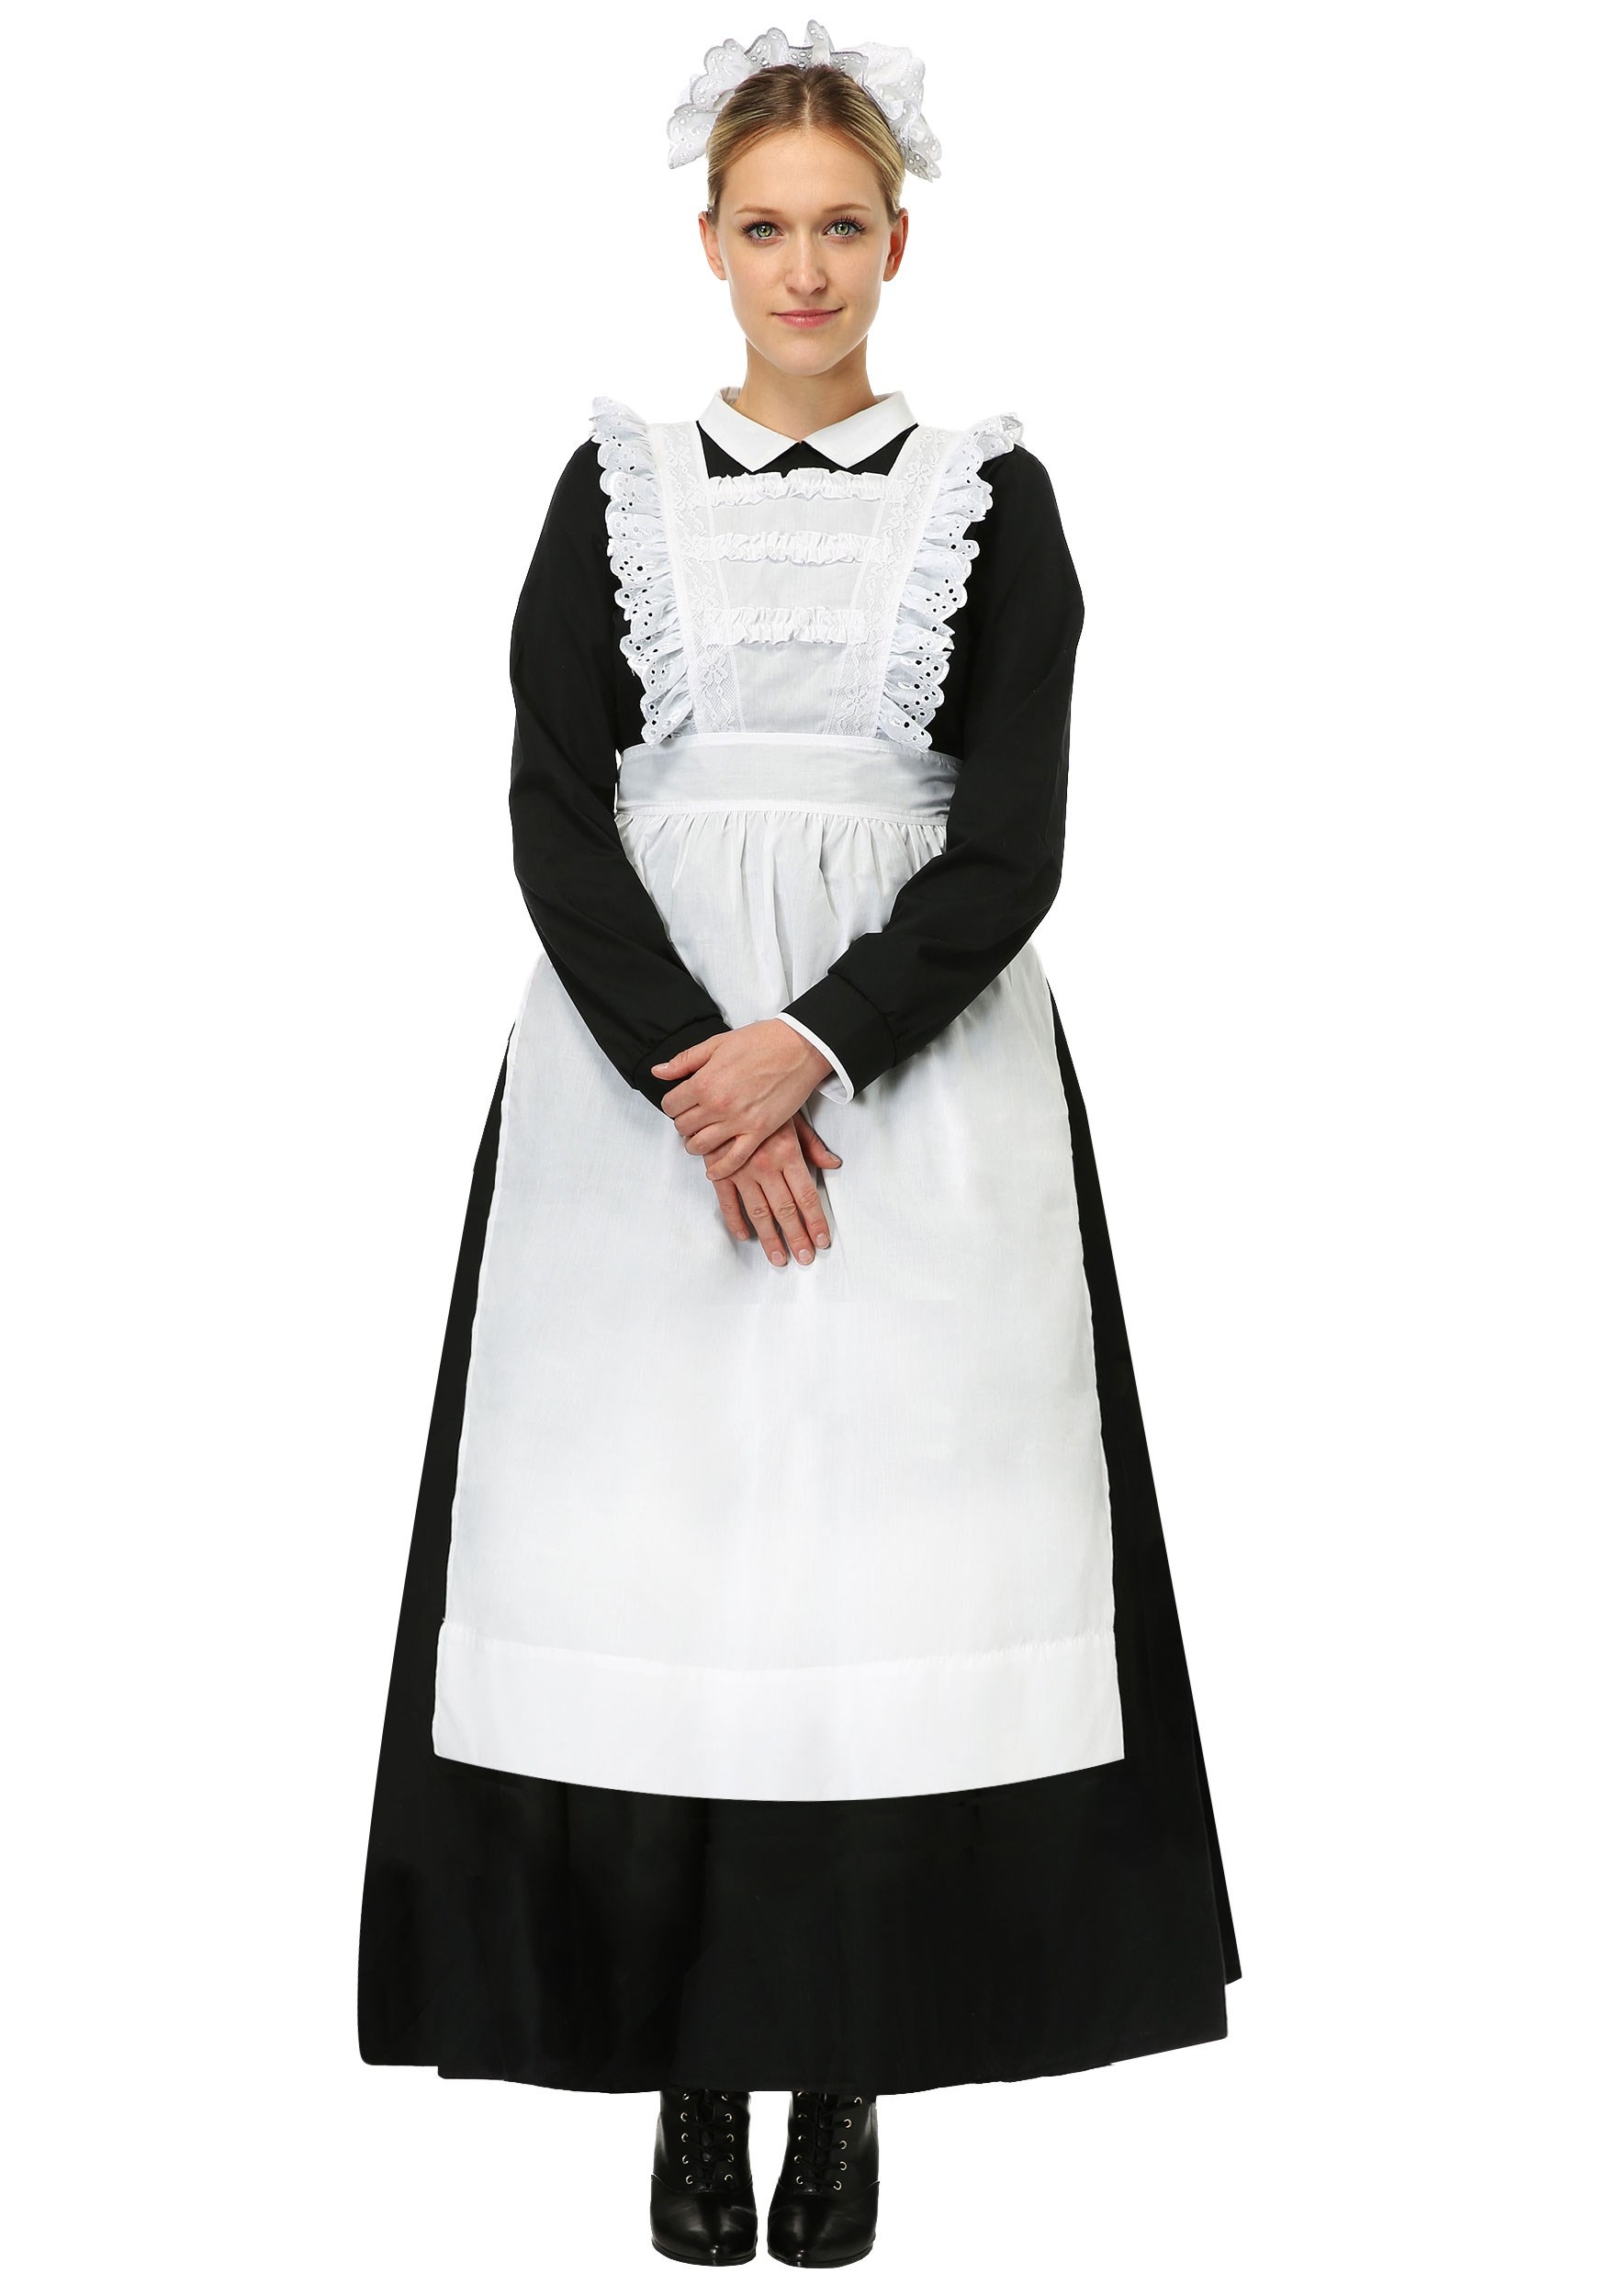 Plus Size Traditional Maid For Women